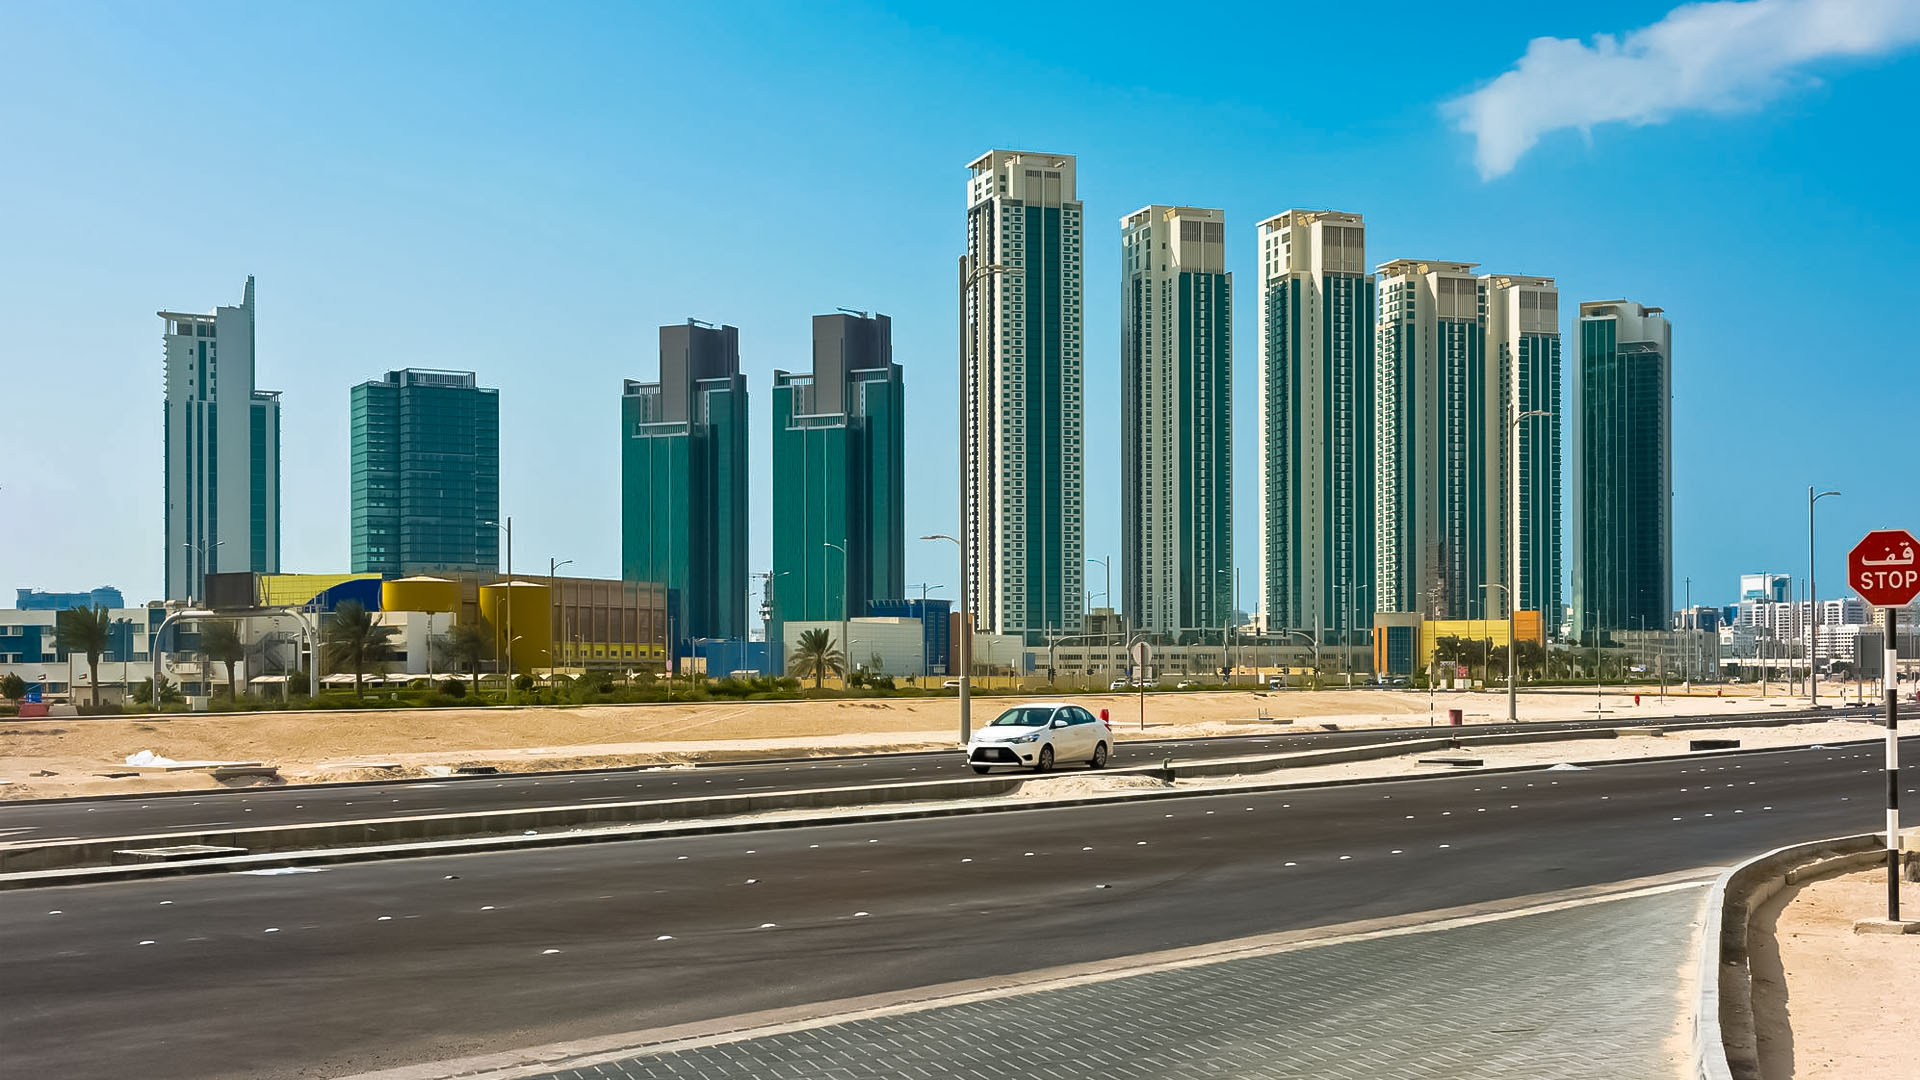 Abu Dhabi tops global list of capitals with least traffic congestion in 2021